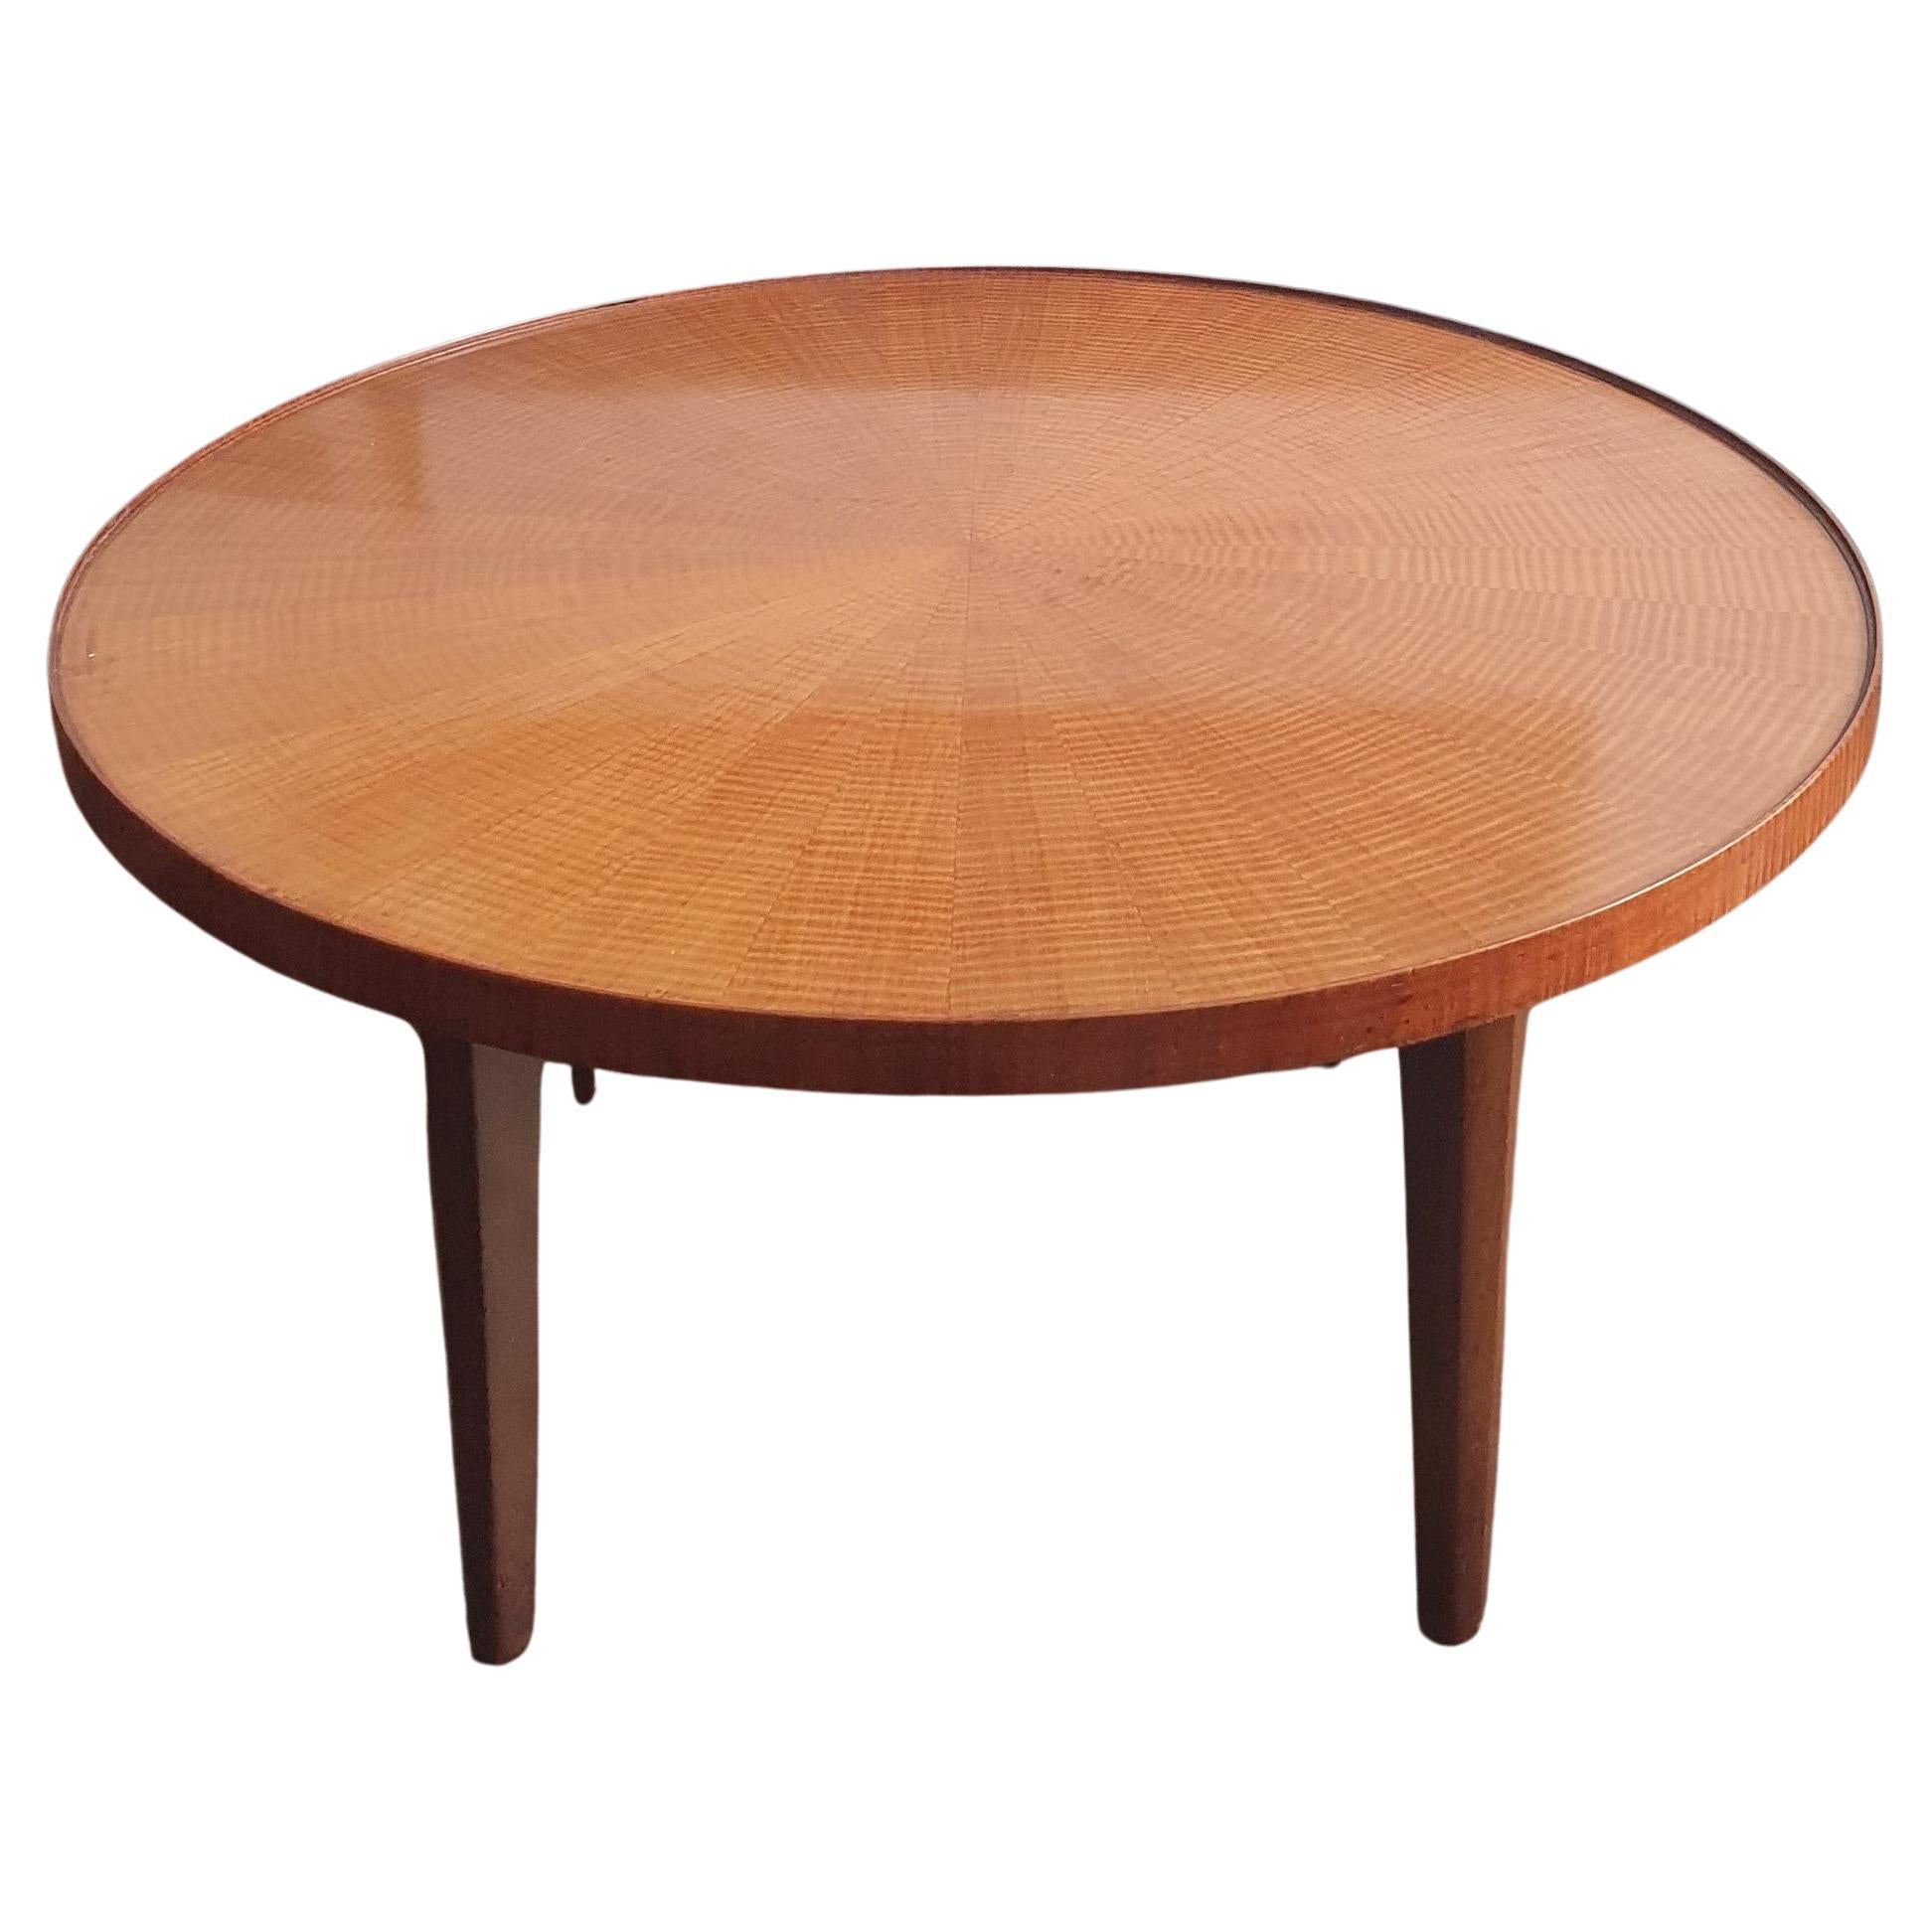 French Mid-Century Modern Coffee Table in Fiddled Sycamore